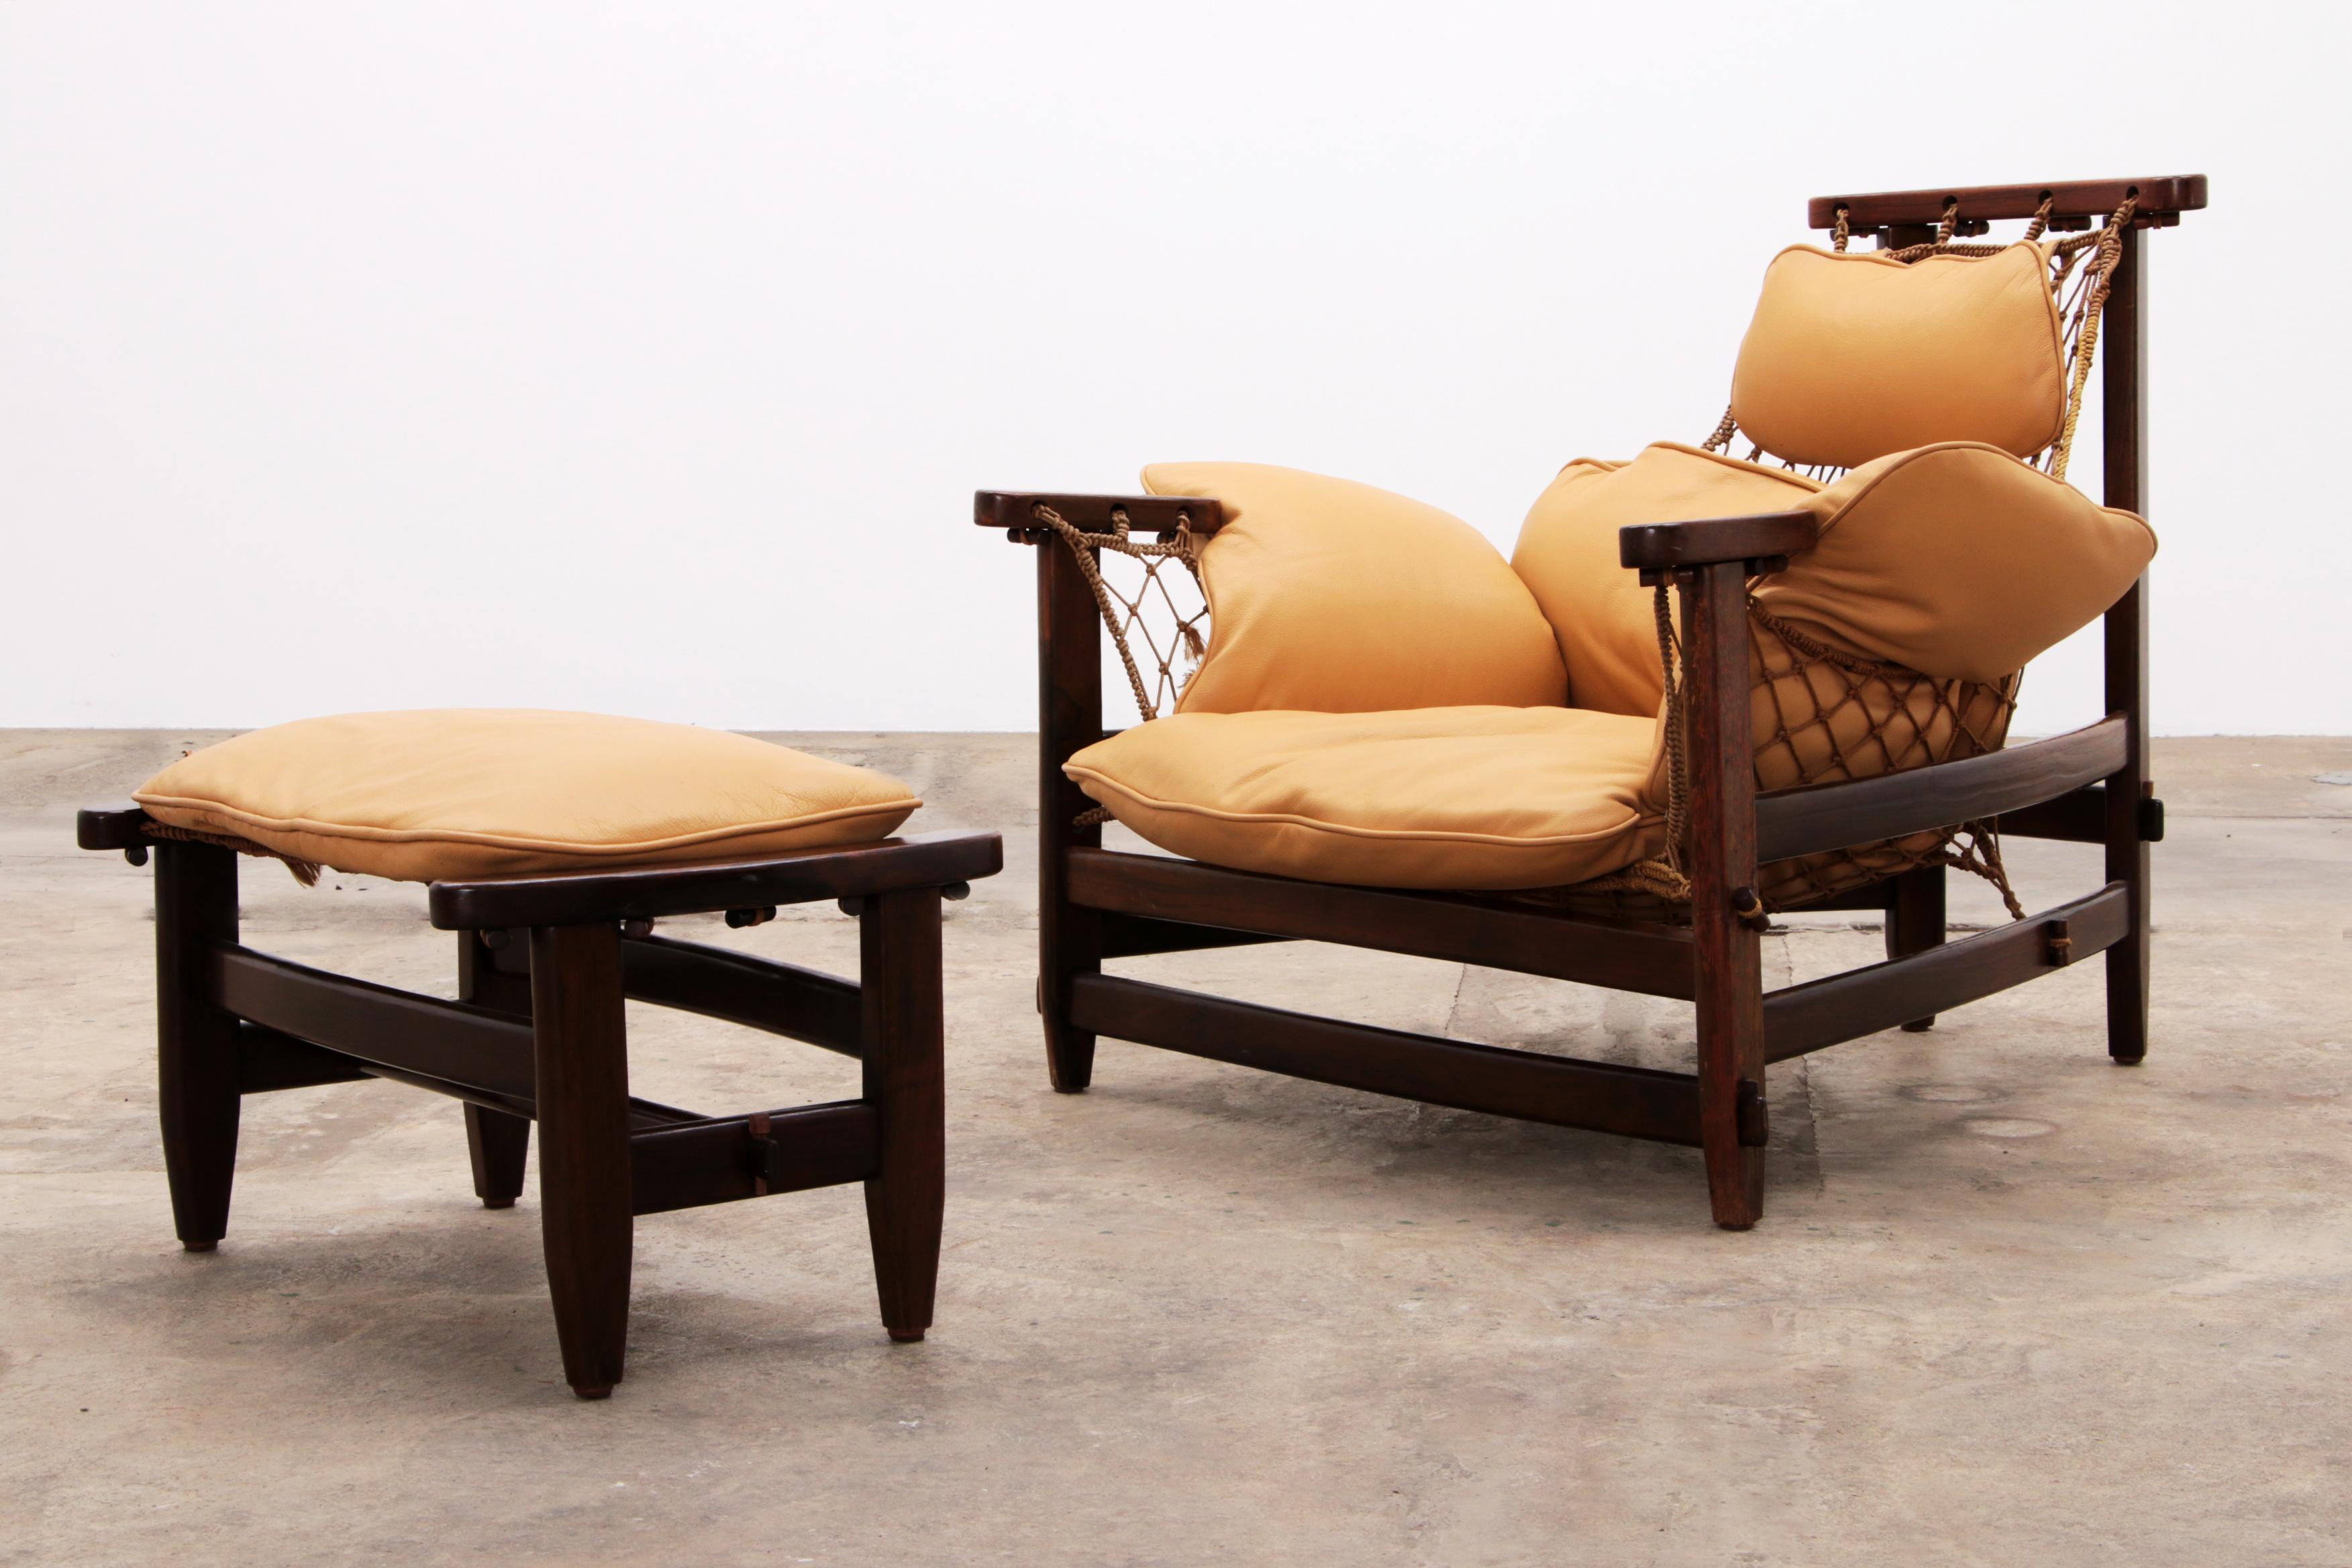 Jean Gillon 'Jangada' lounge chair and ottoman in tropical wood and leather. 2